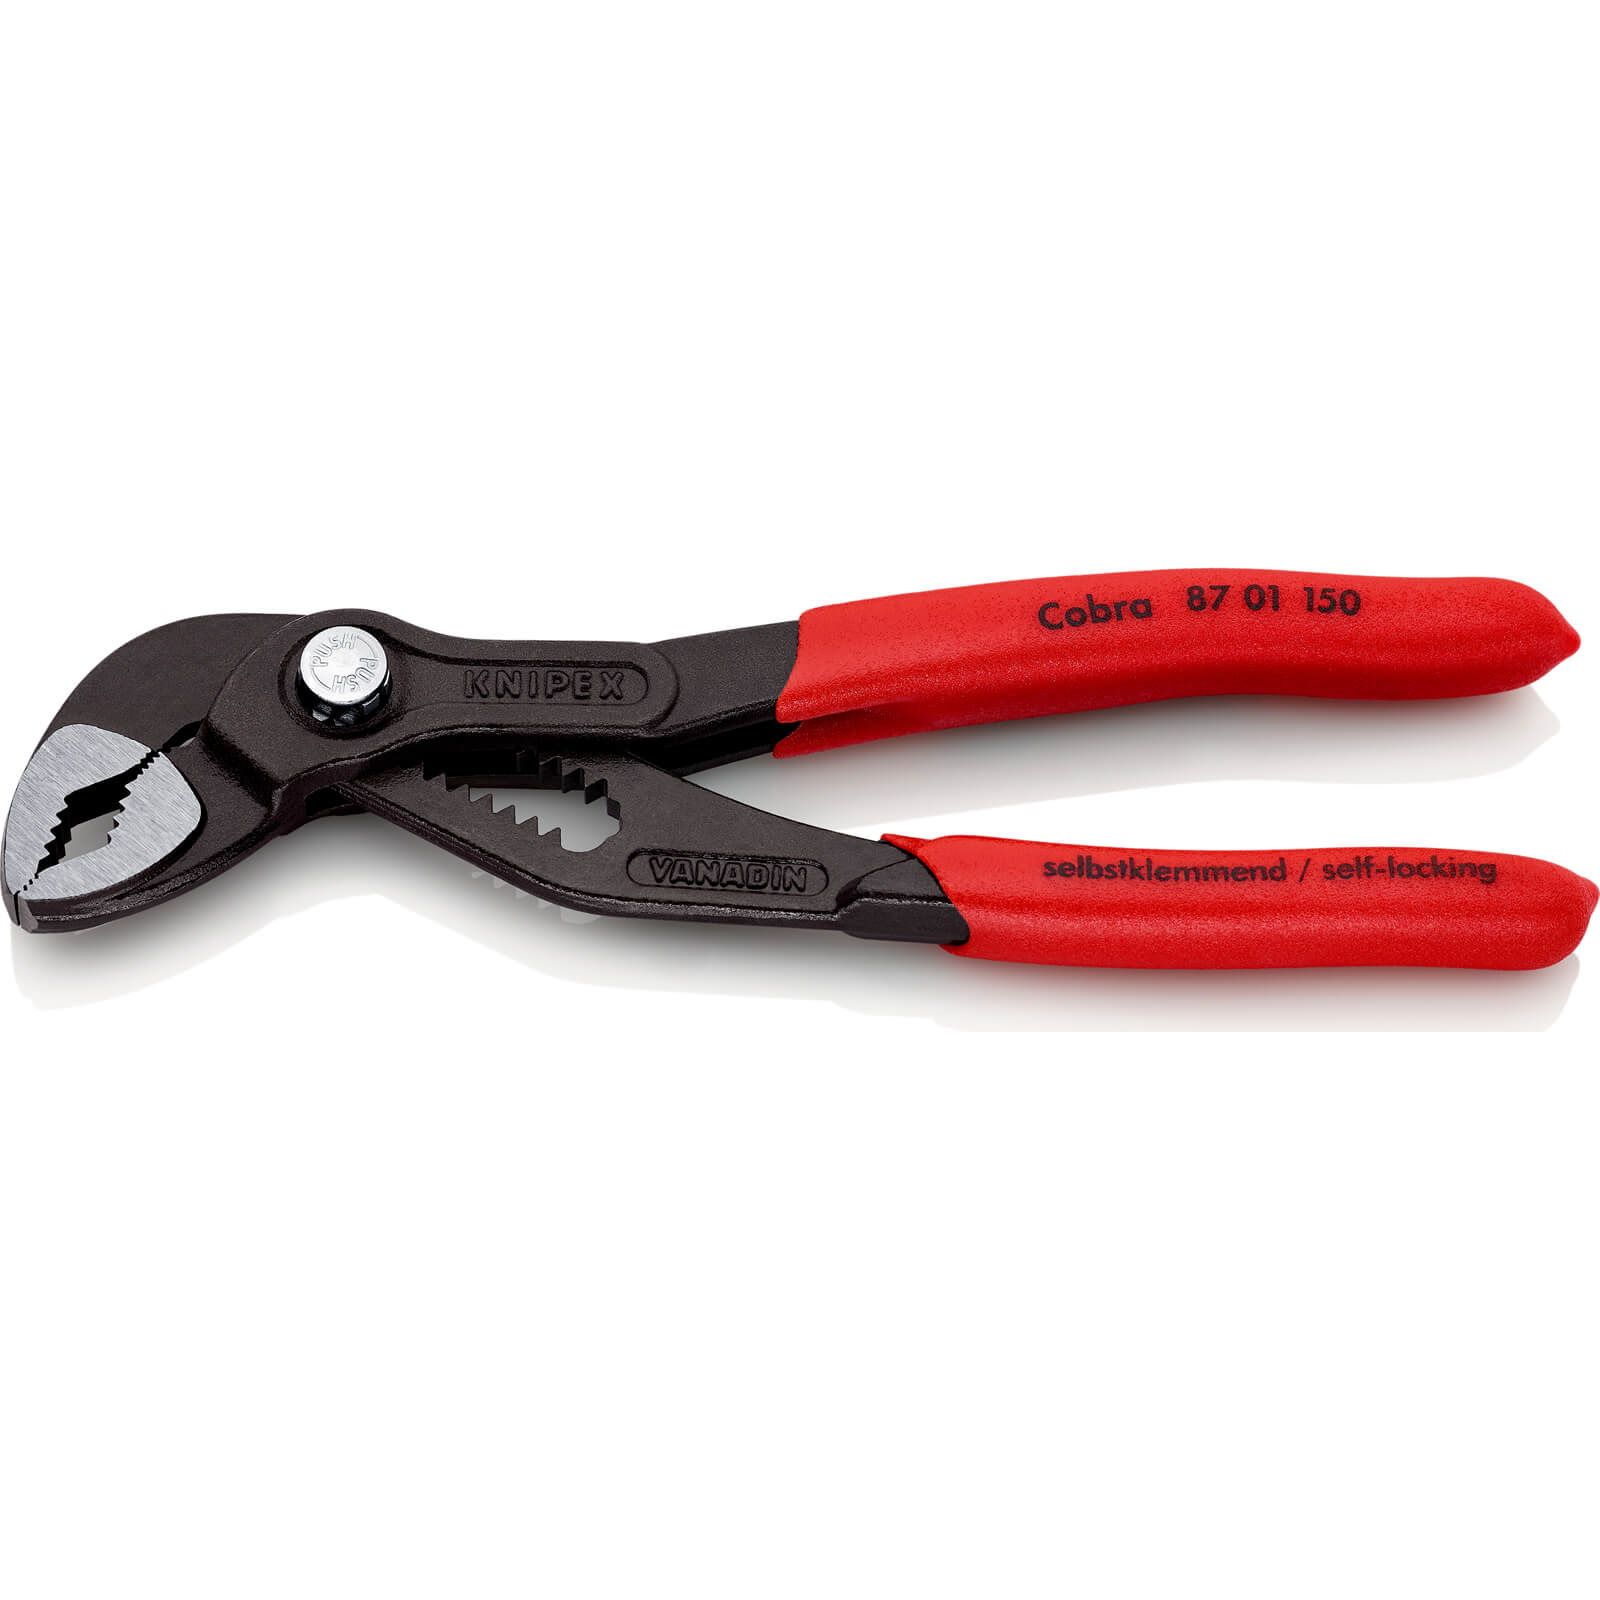 Image of Knipex 87 01 Cobra Hightech Water Pump Pliers 150mm